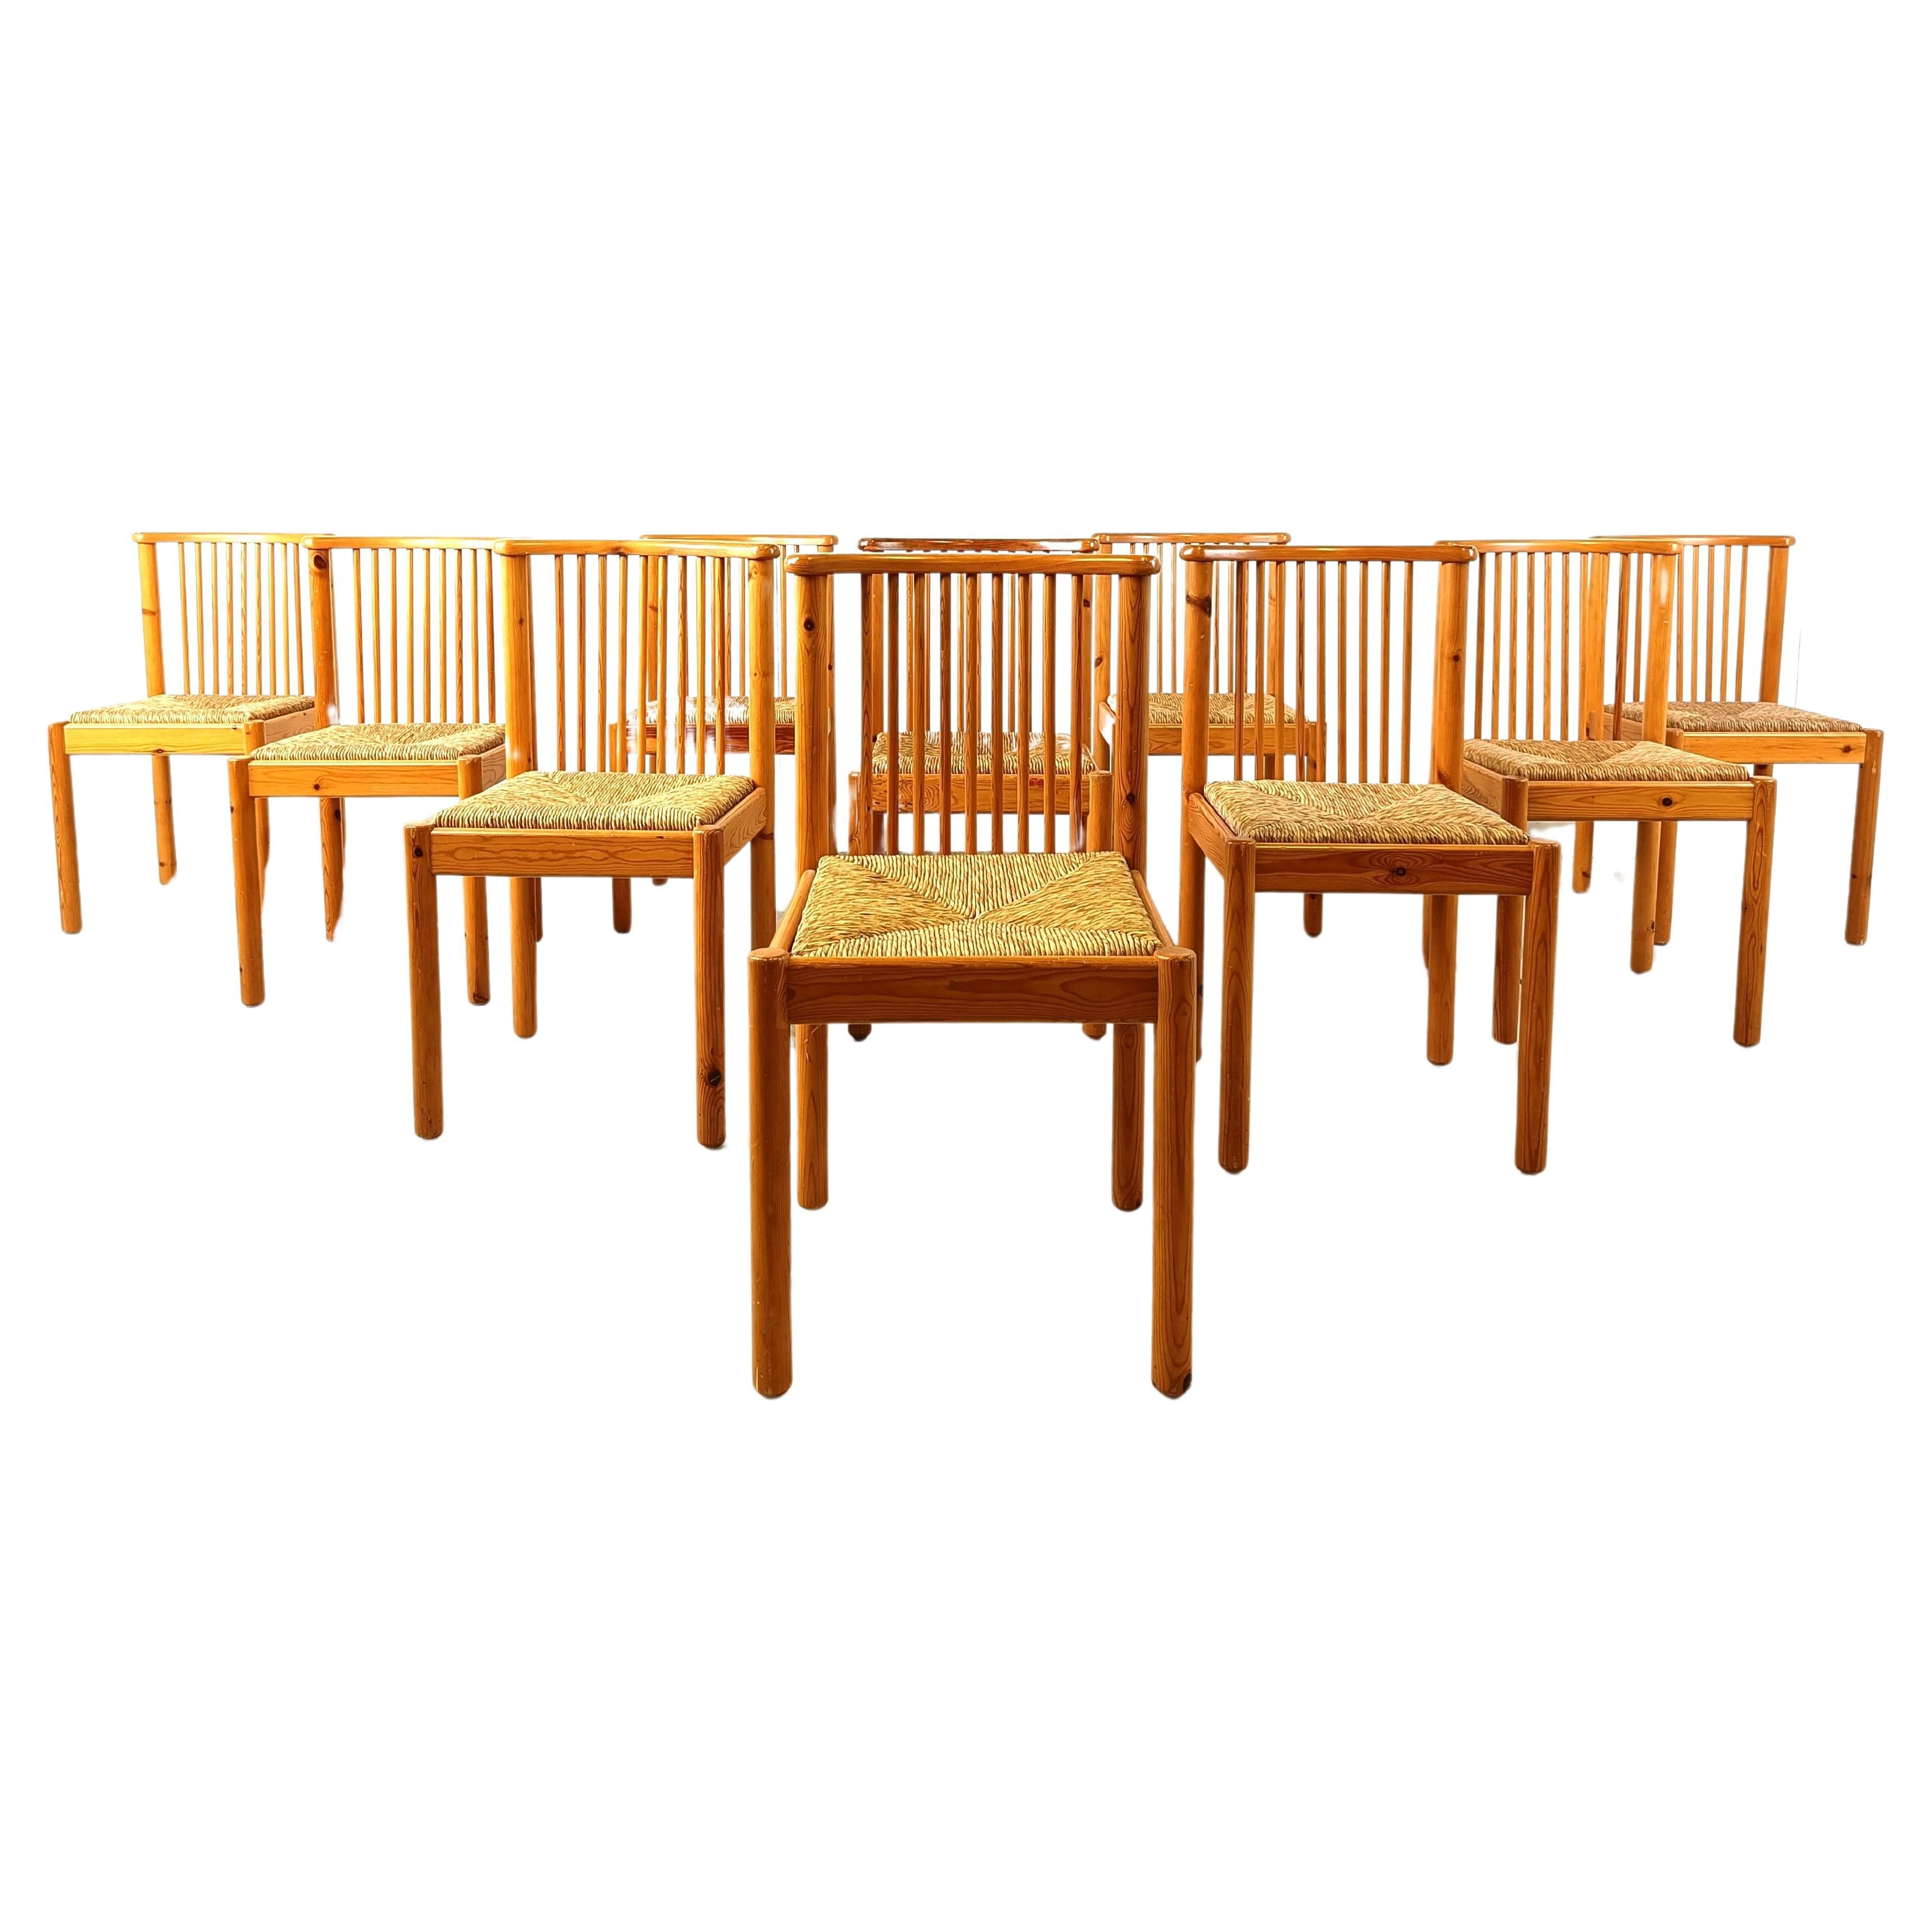 Scandinavian pine wood and wicker dining chairs, set of 10, 1970s For Sale